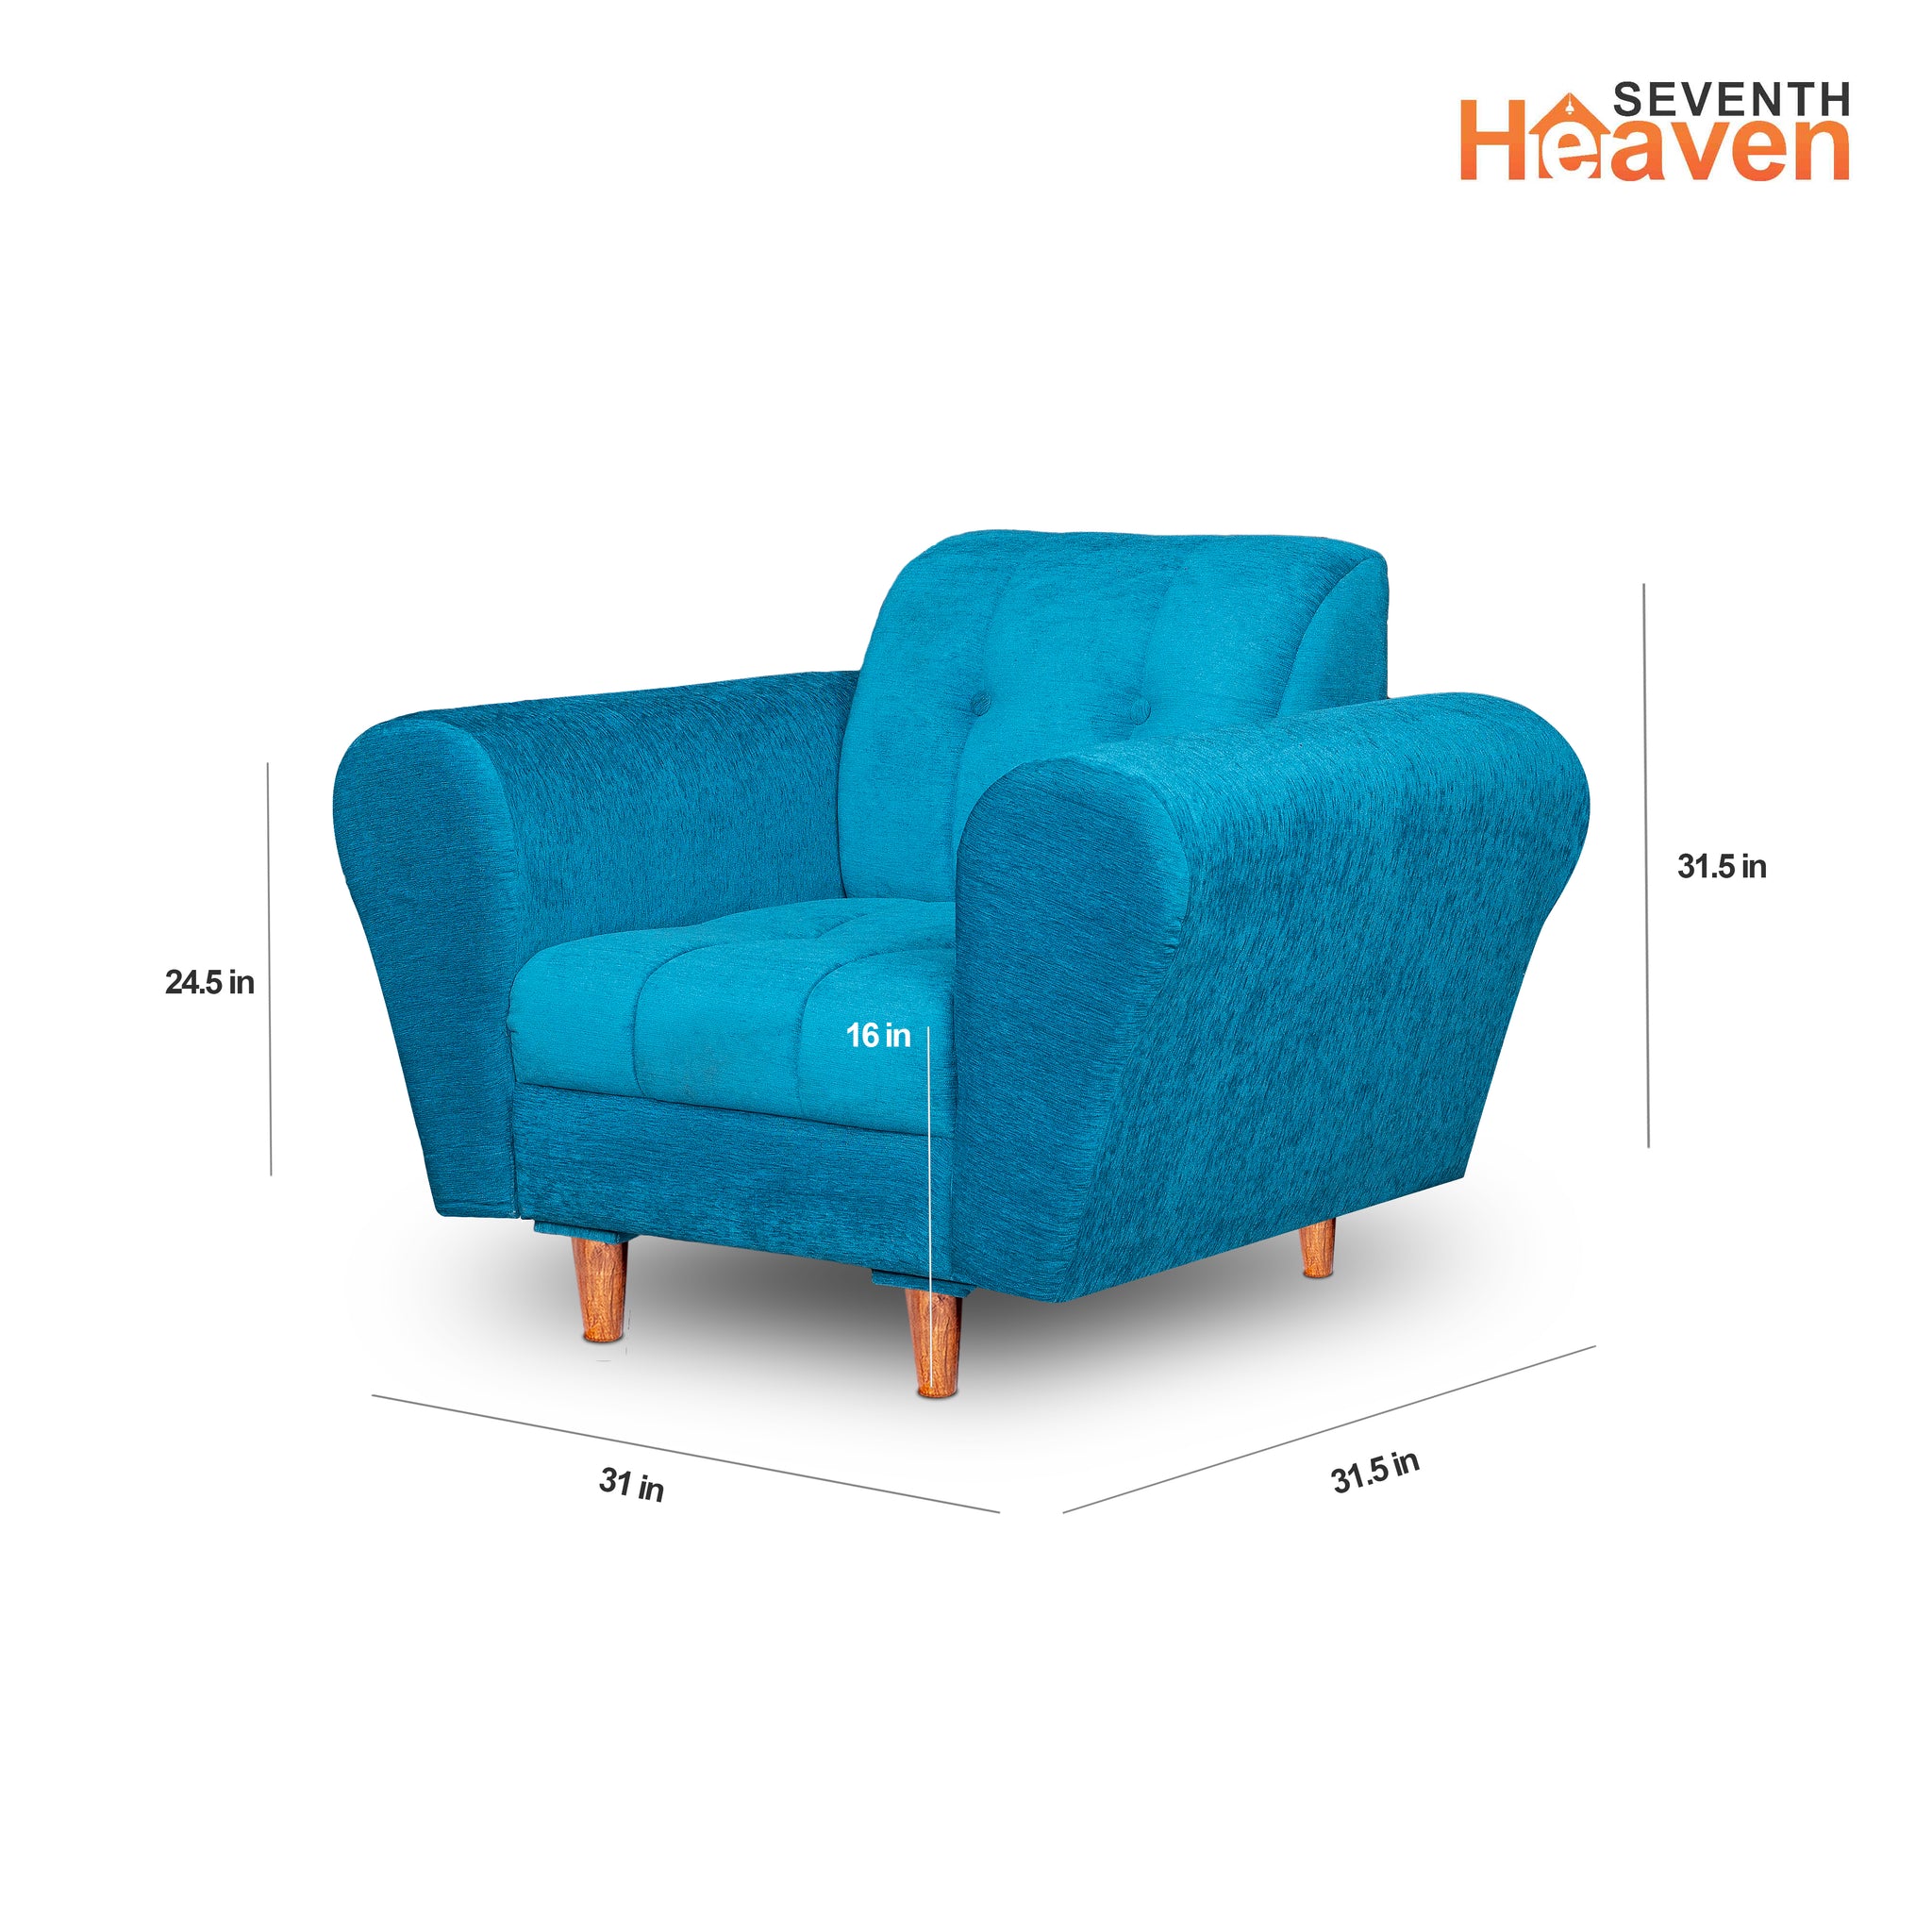 Seventh Heaven Milan 1 Seater Wooden Sofa Set Modern & Elegant Smart Furniture Range for luxurious homes, living rooms and offices. Sky Blue Colour Molphino fabric with sheesham polished wooden legs. Product dimensions are also mentioned.